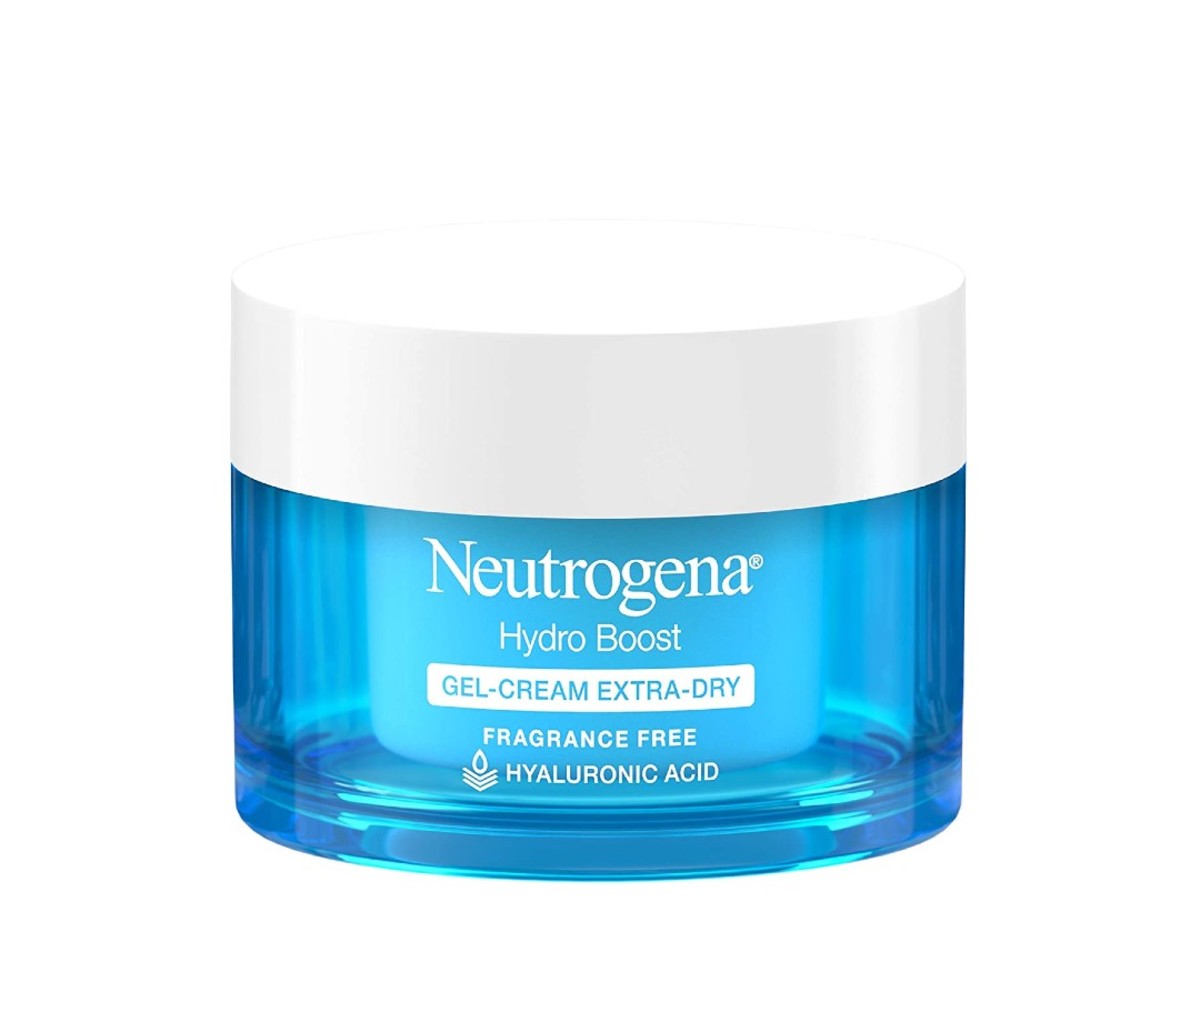 Neutrogena Hydro Boost Gel-Cream with Hyaluronic Acid for Extra Dry Skin